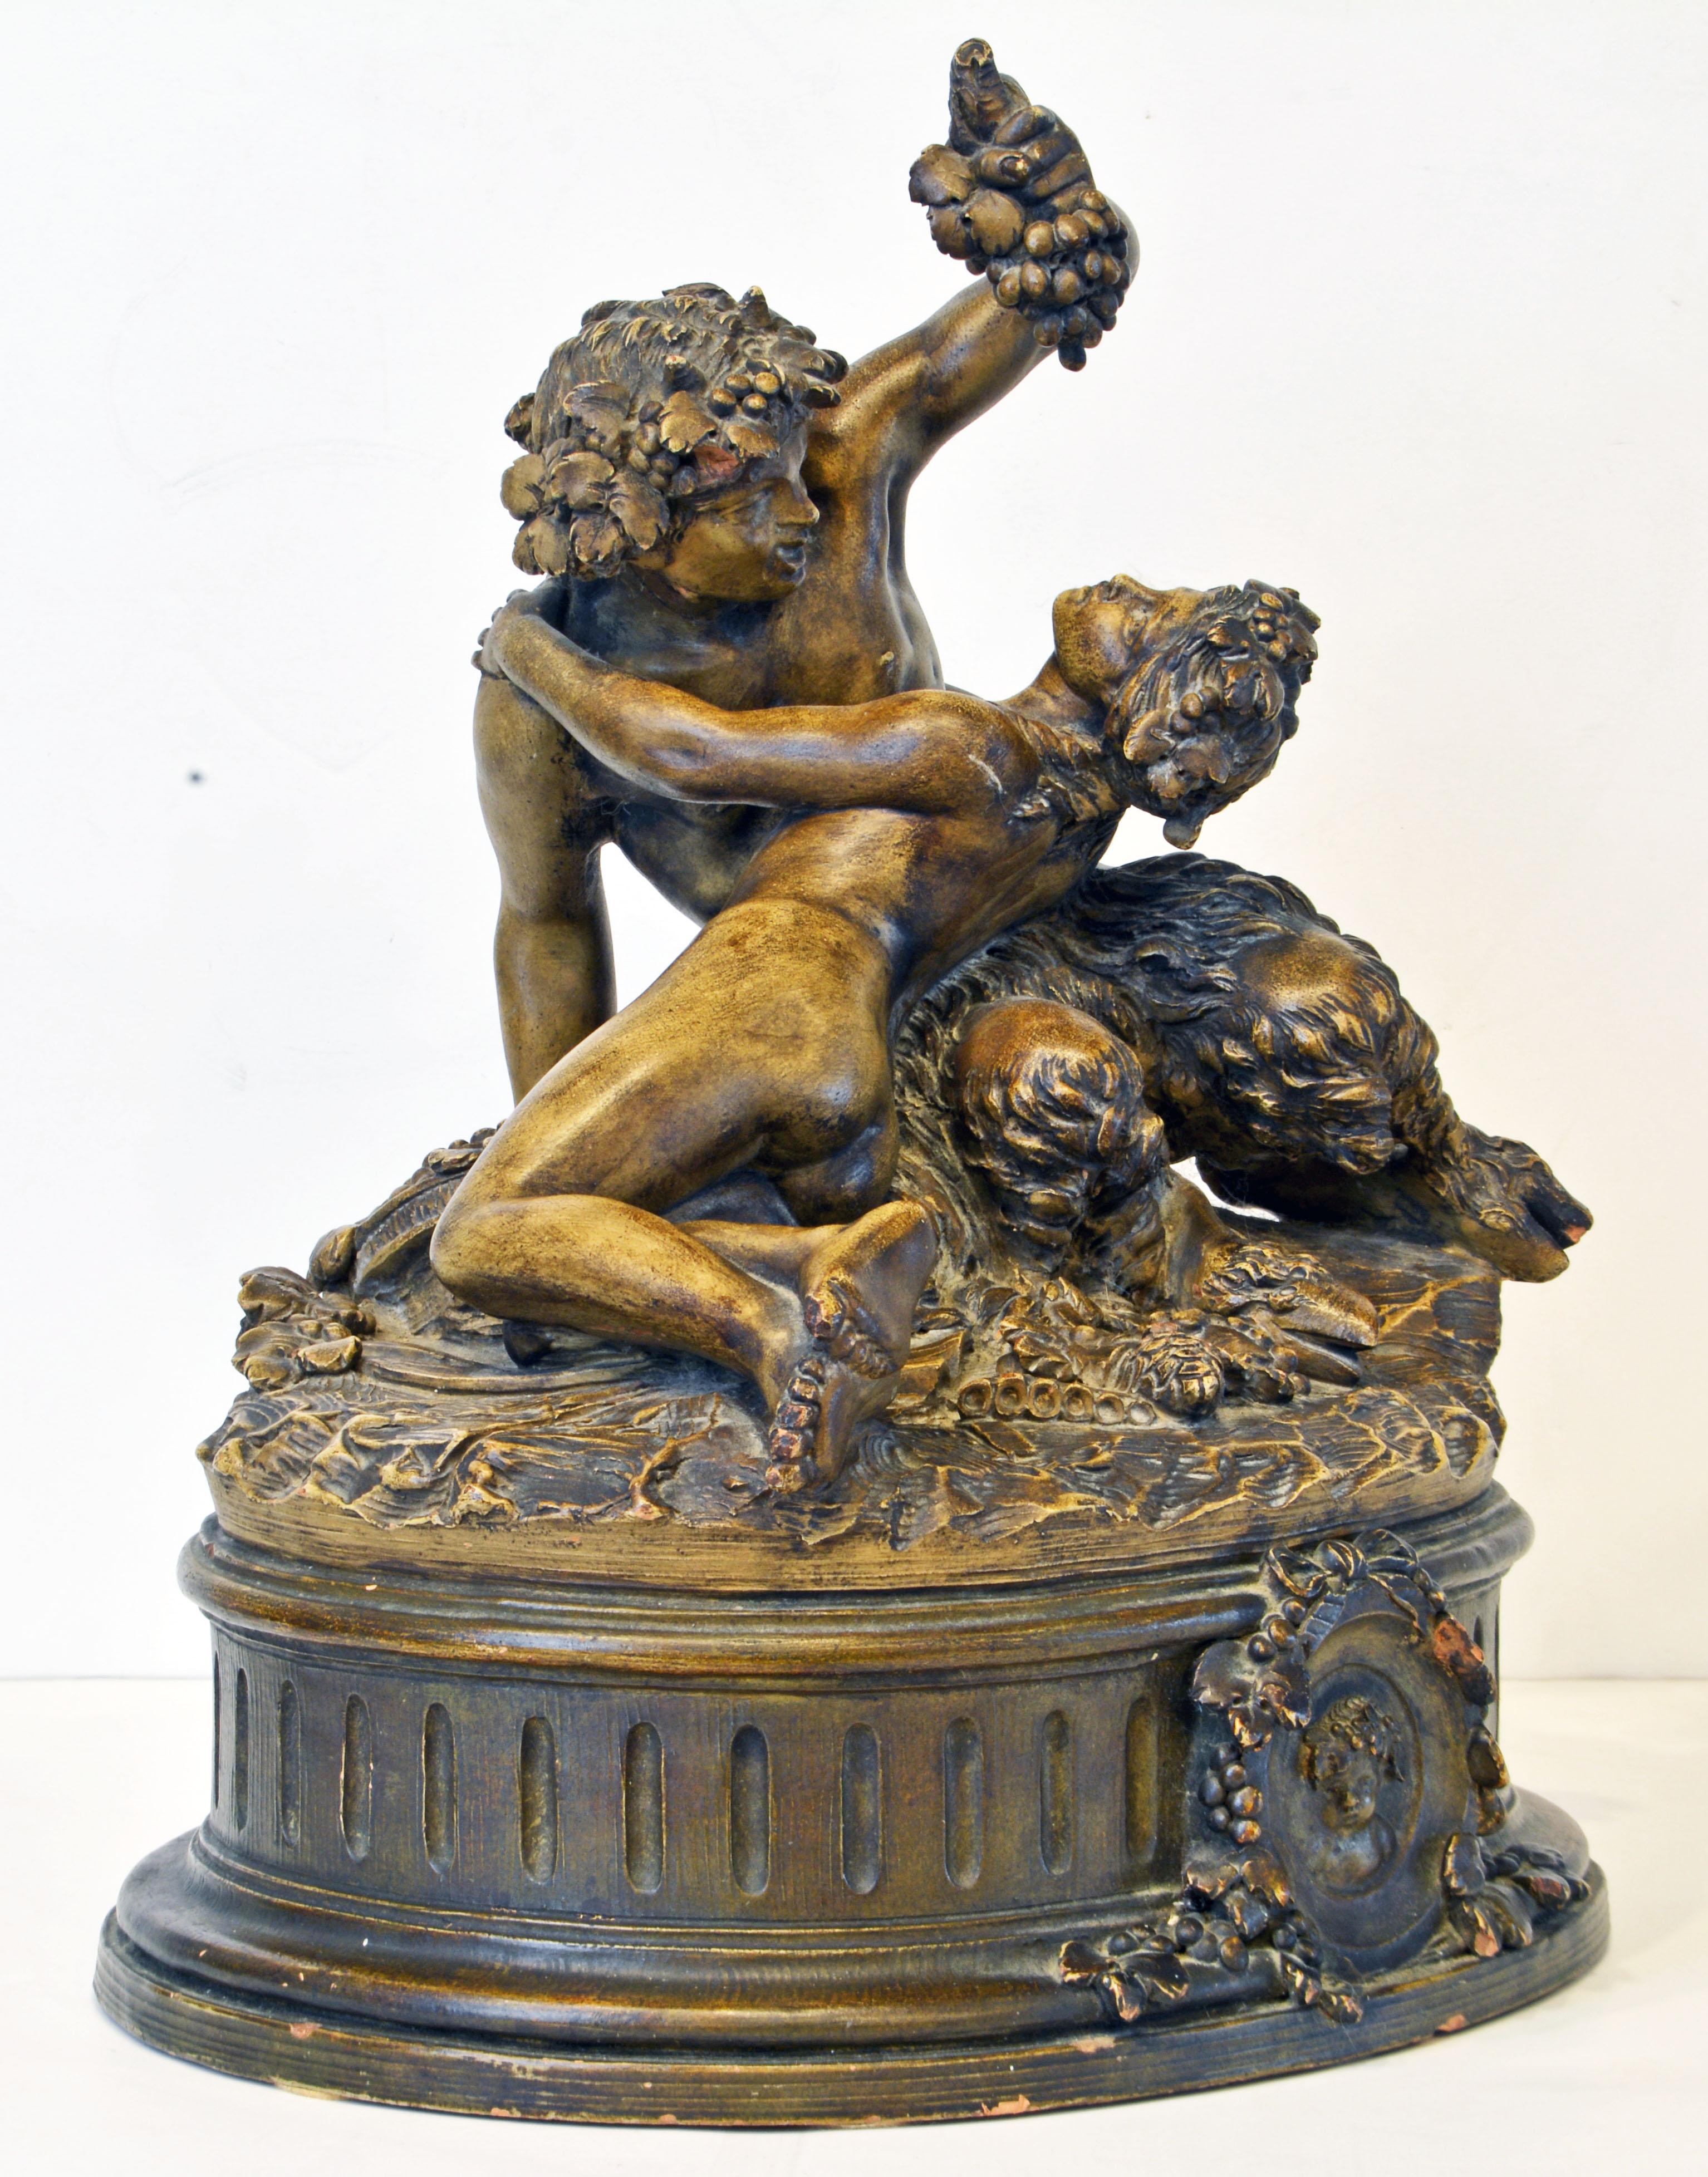 A large patinated terracotta sculpture depicting a youang Satyr playing with a Nymph on an oval base sculpted in the Louis XVI style. Work of the late nineteenth century after Claude Michel dit Clodion (1738-1814).